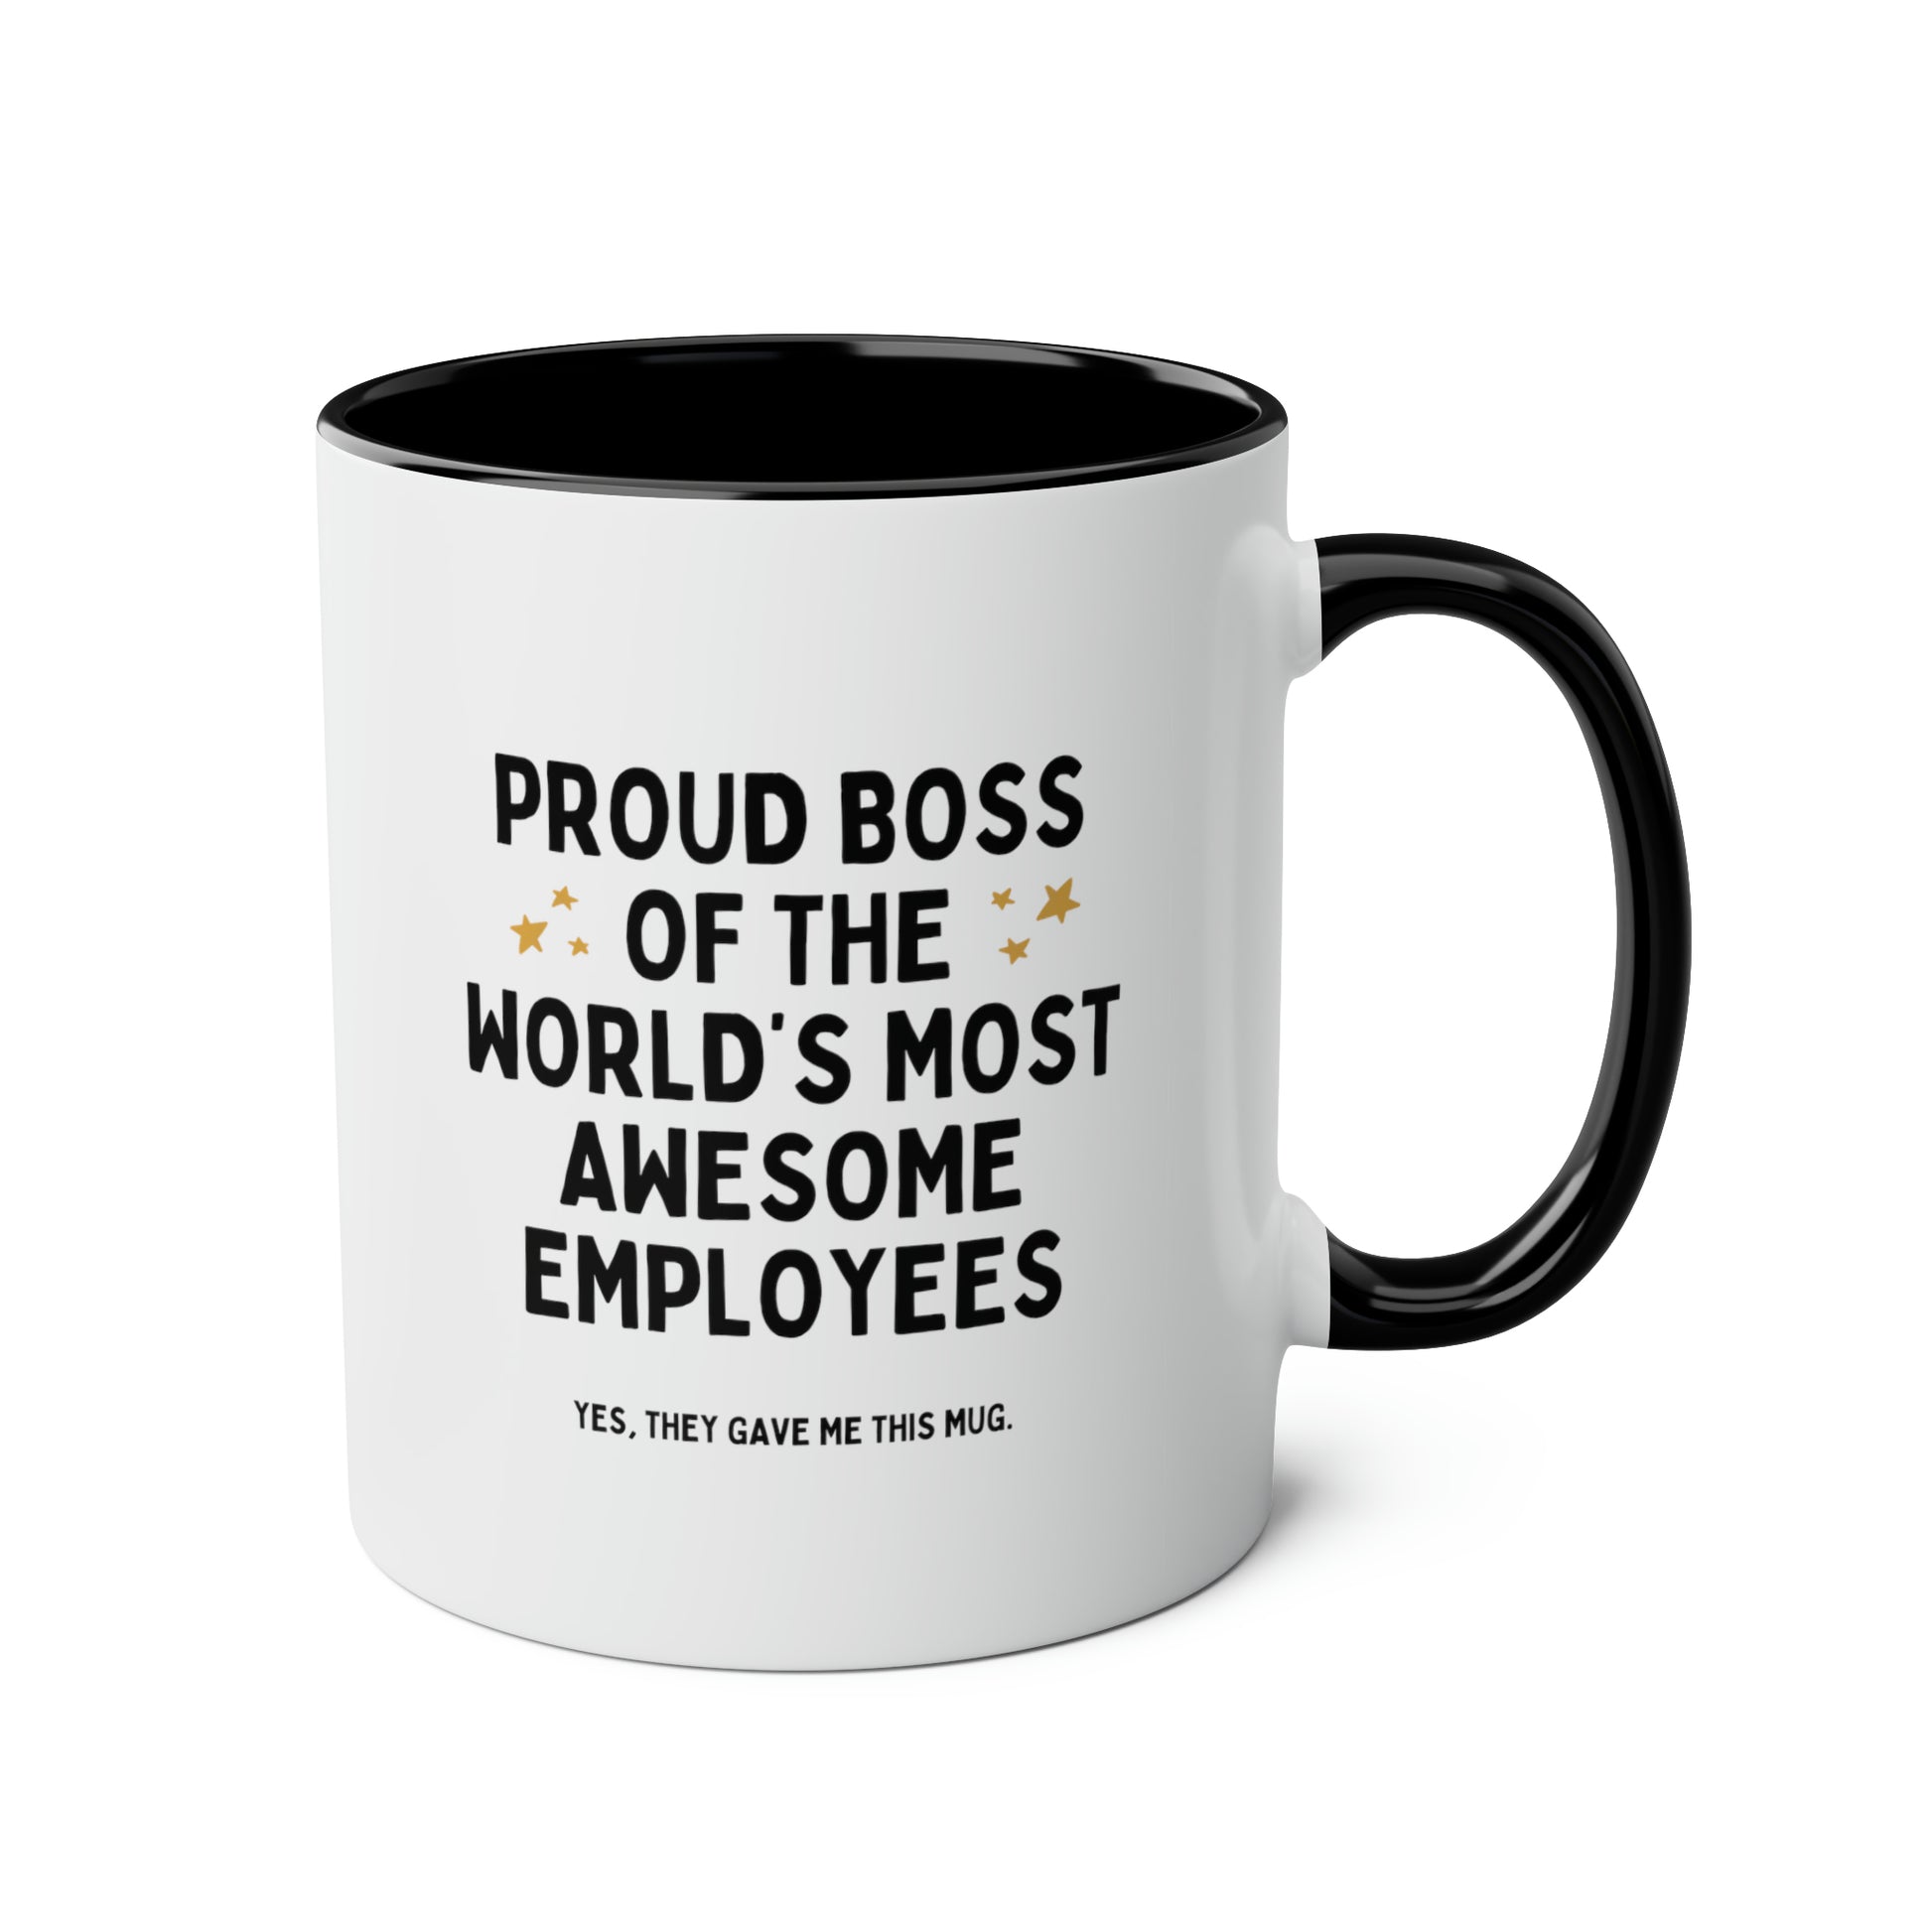 Proud Boss Of The World's Most Awesome Employees 11oz white with black accent funny large coffee mug gift for  secret santa coworker supervisor appreciation waveywares wavey wares wavywares wavy wares